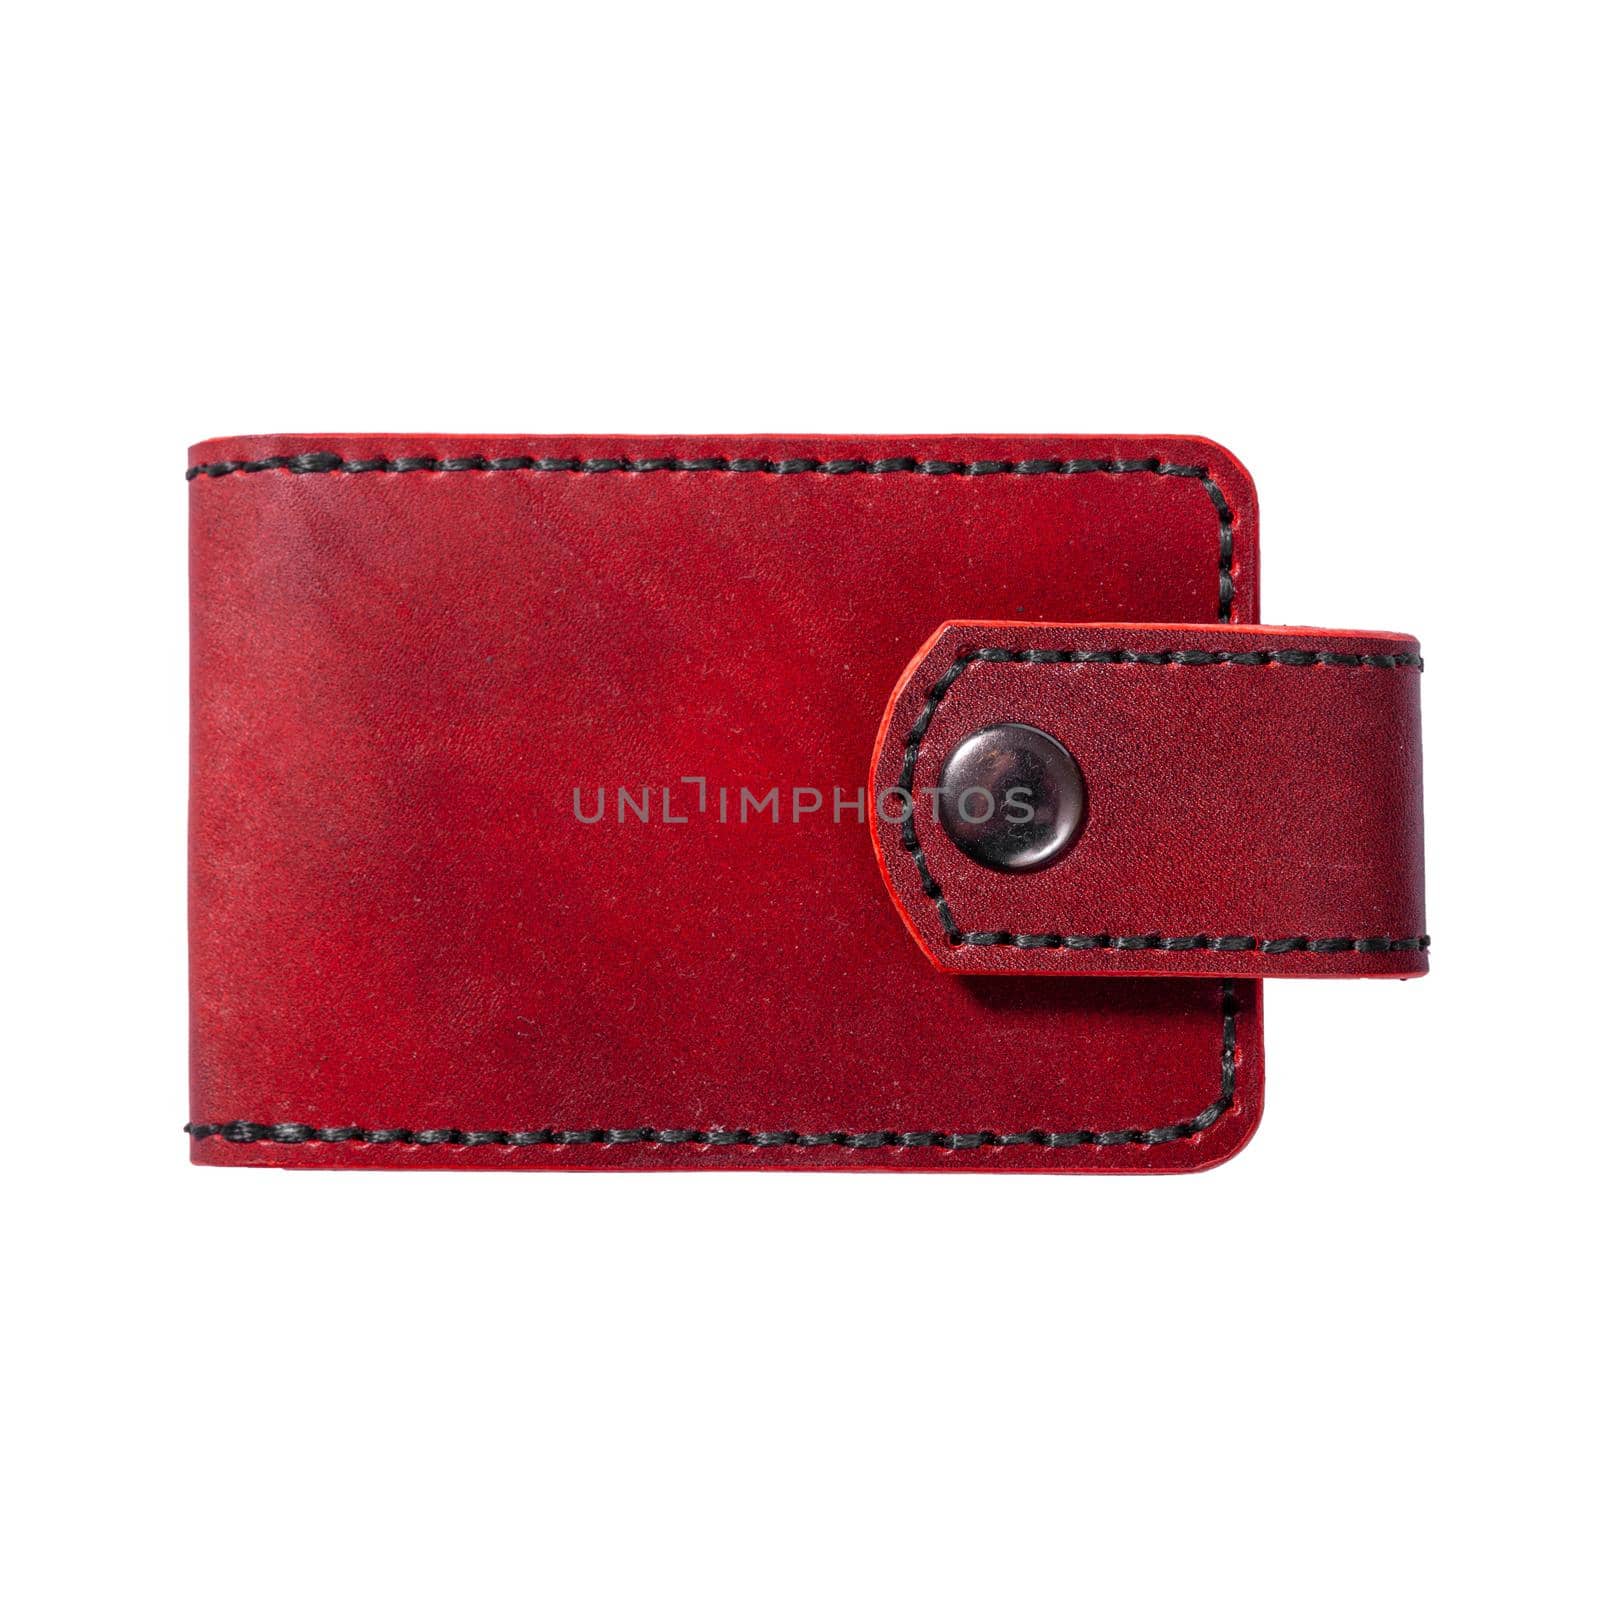 Luxury craft business card holder case made of leather. Red Leather box for cards isolated on white background.